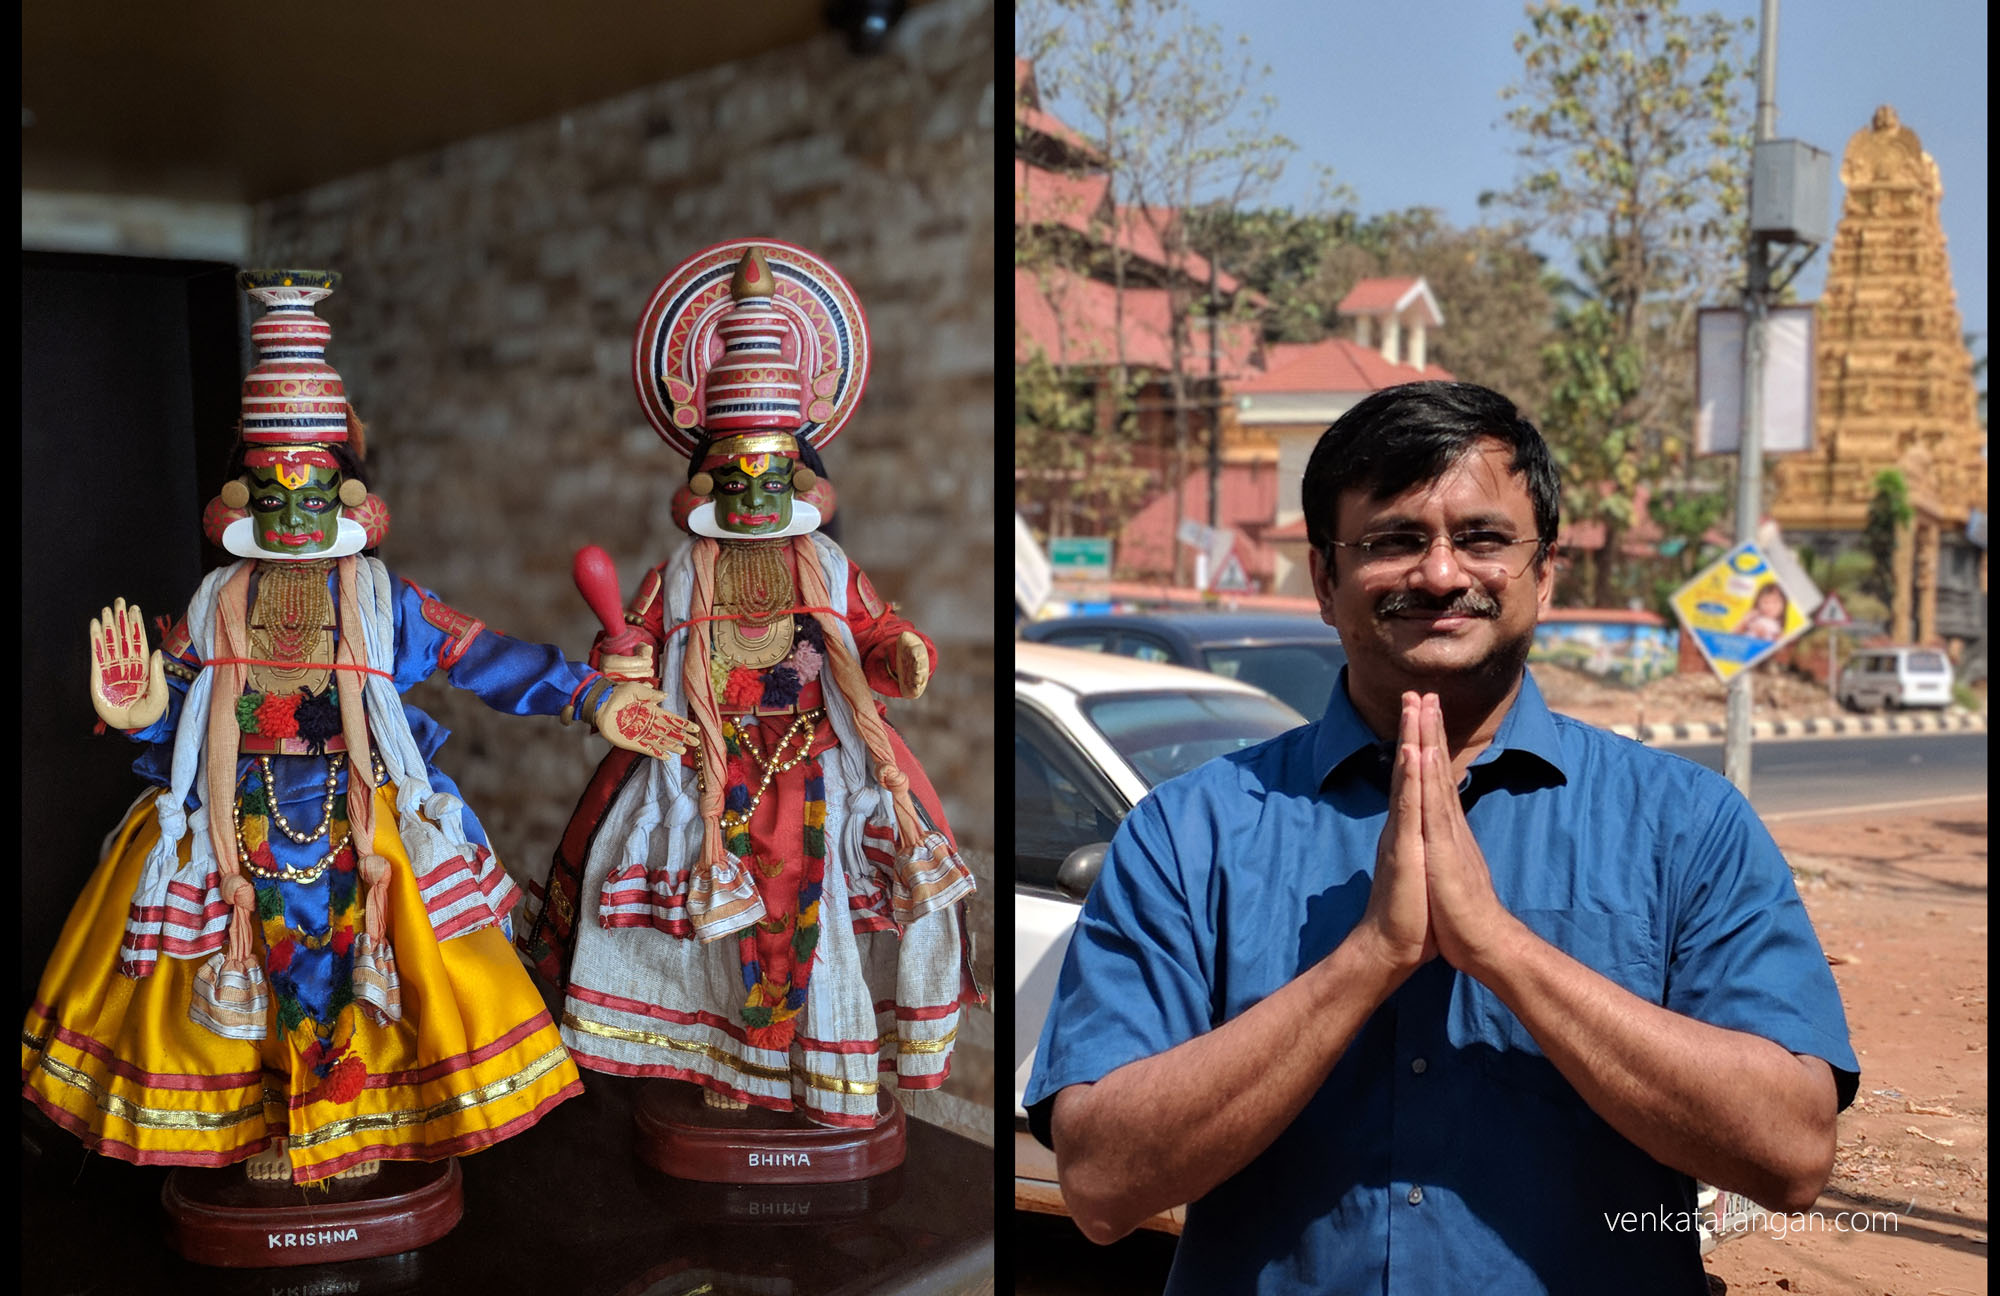 As you enter Kerala you are sure to be greeted by them - Seen here Krishna &amp; Bhima kathakali dolls